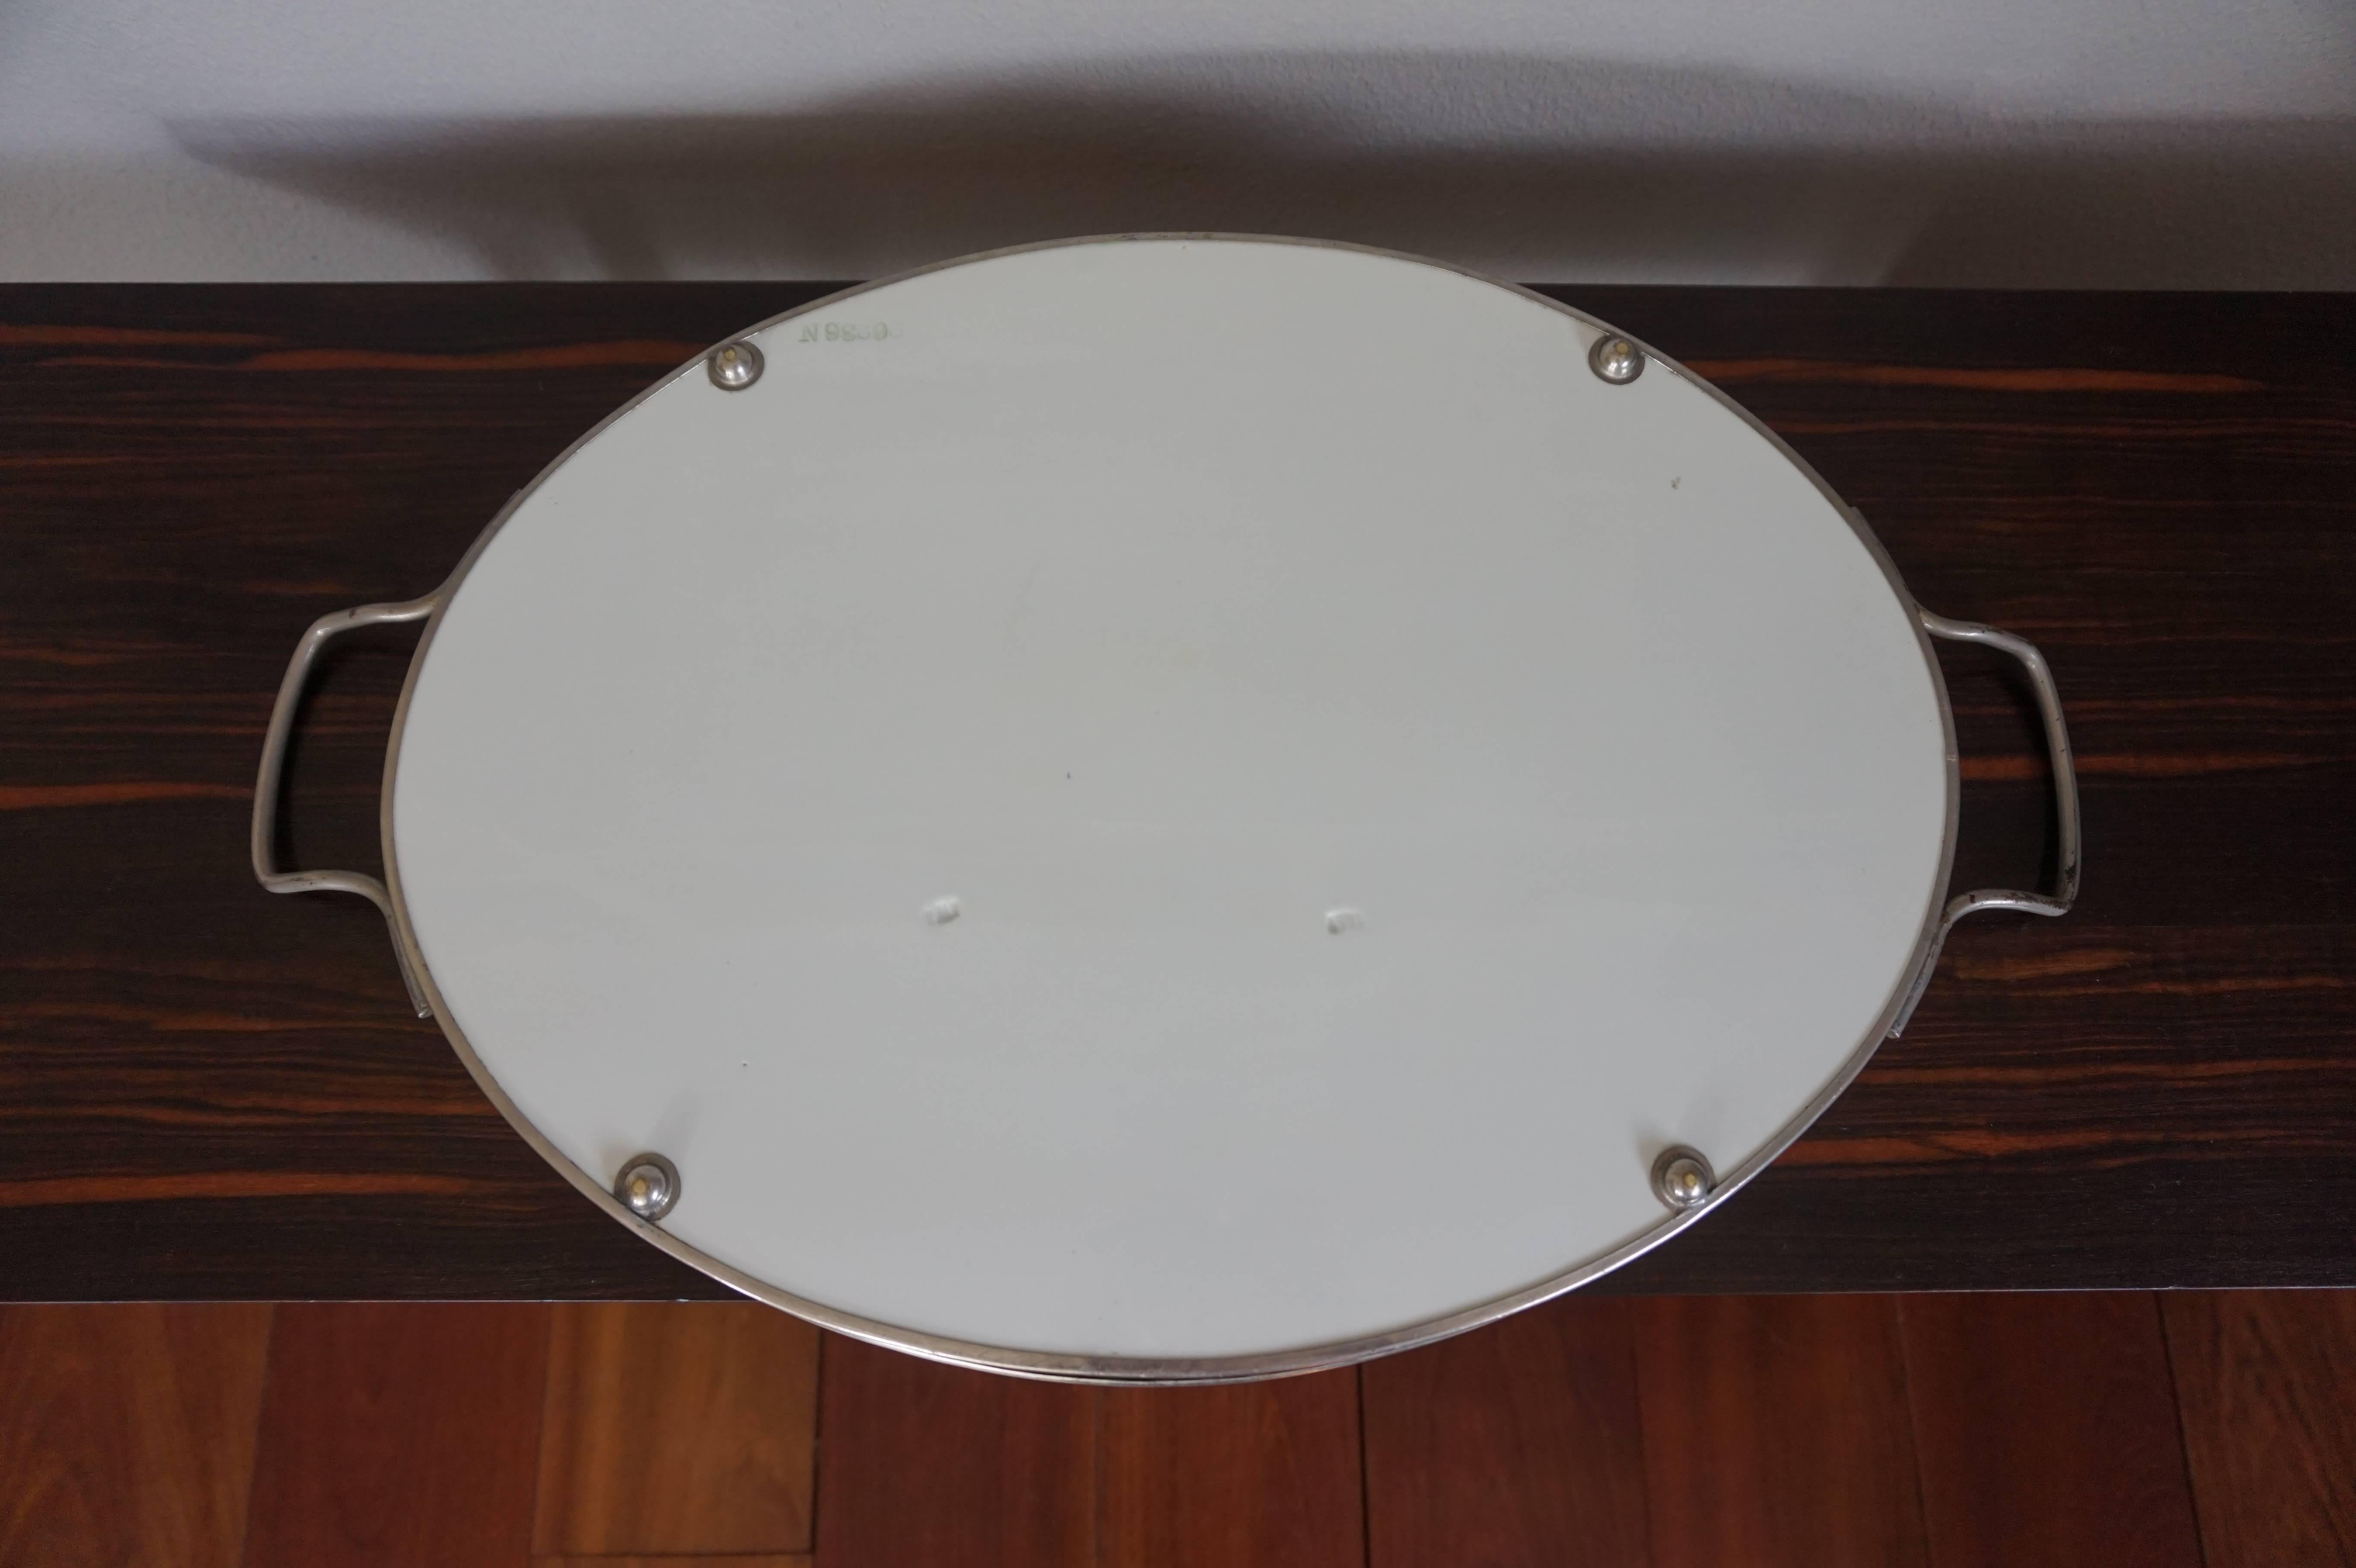 Porcelain Early 20th Century Oval Art Deco Single Tile Serving Tray with Geometrical Motif